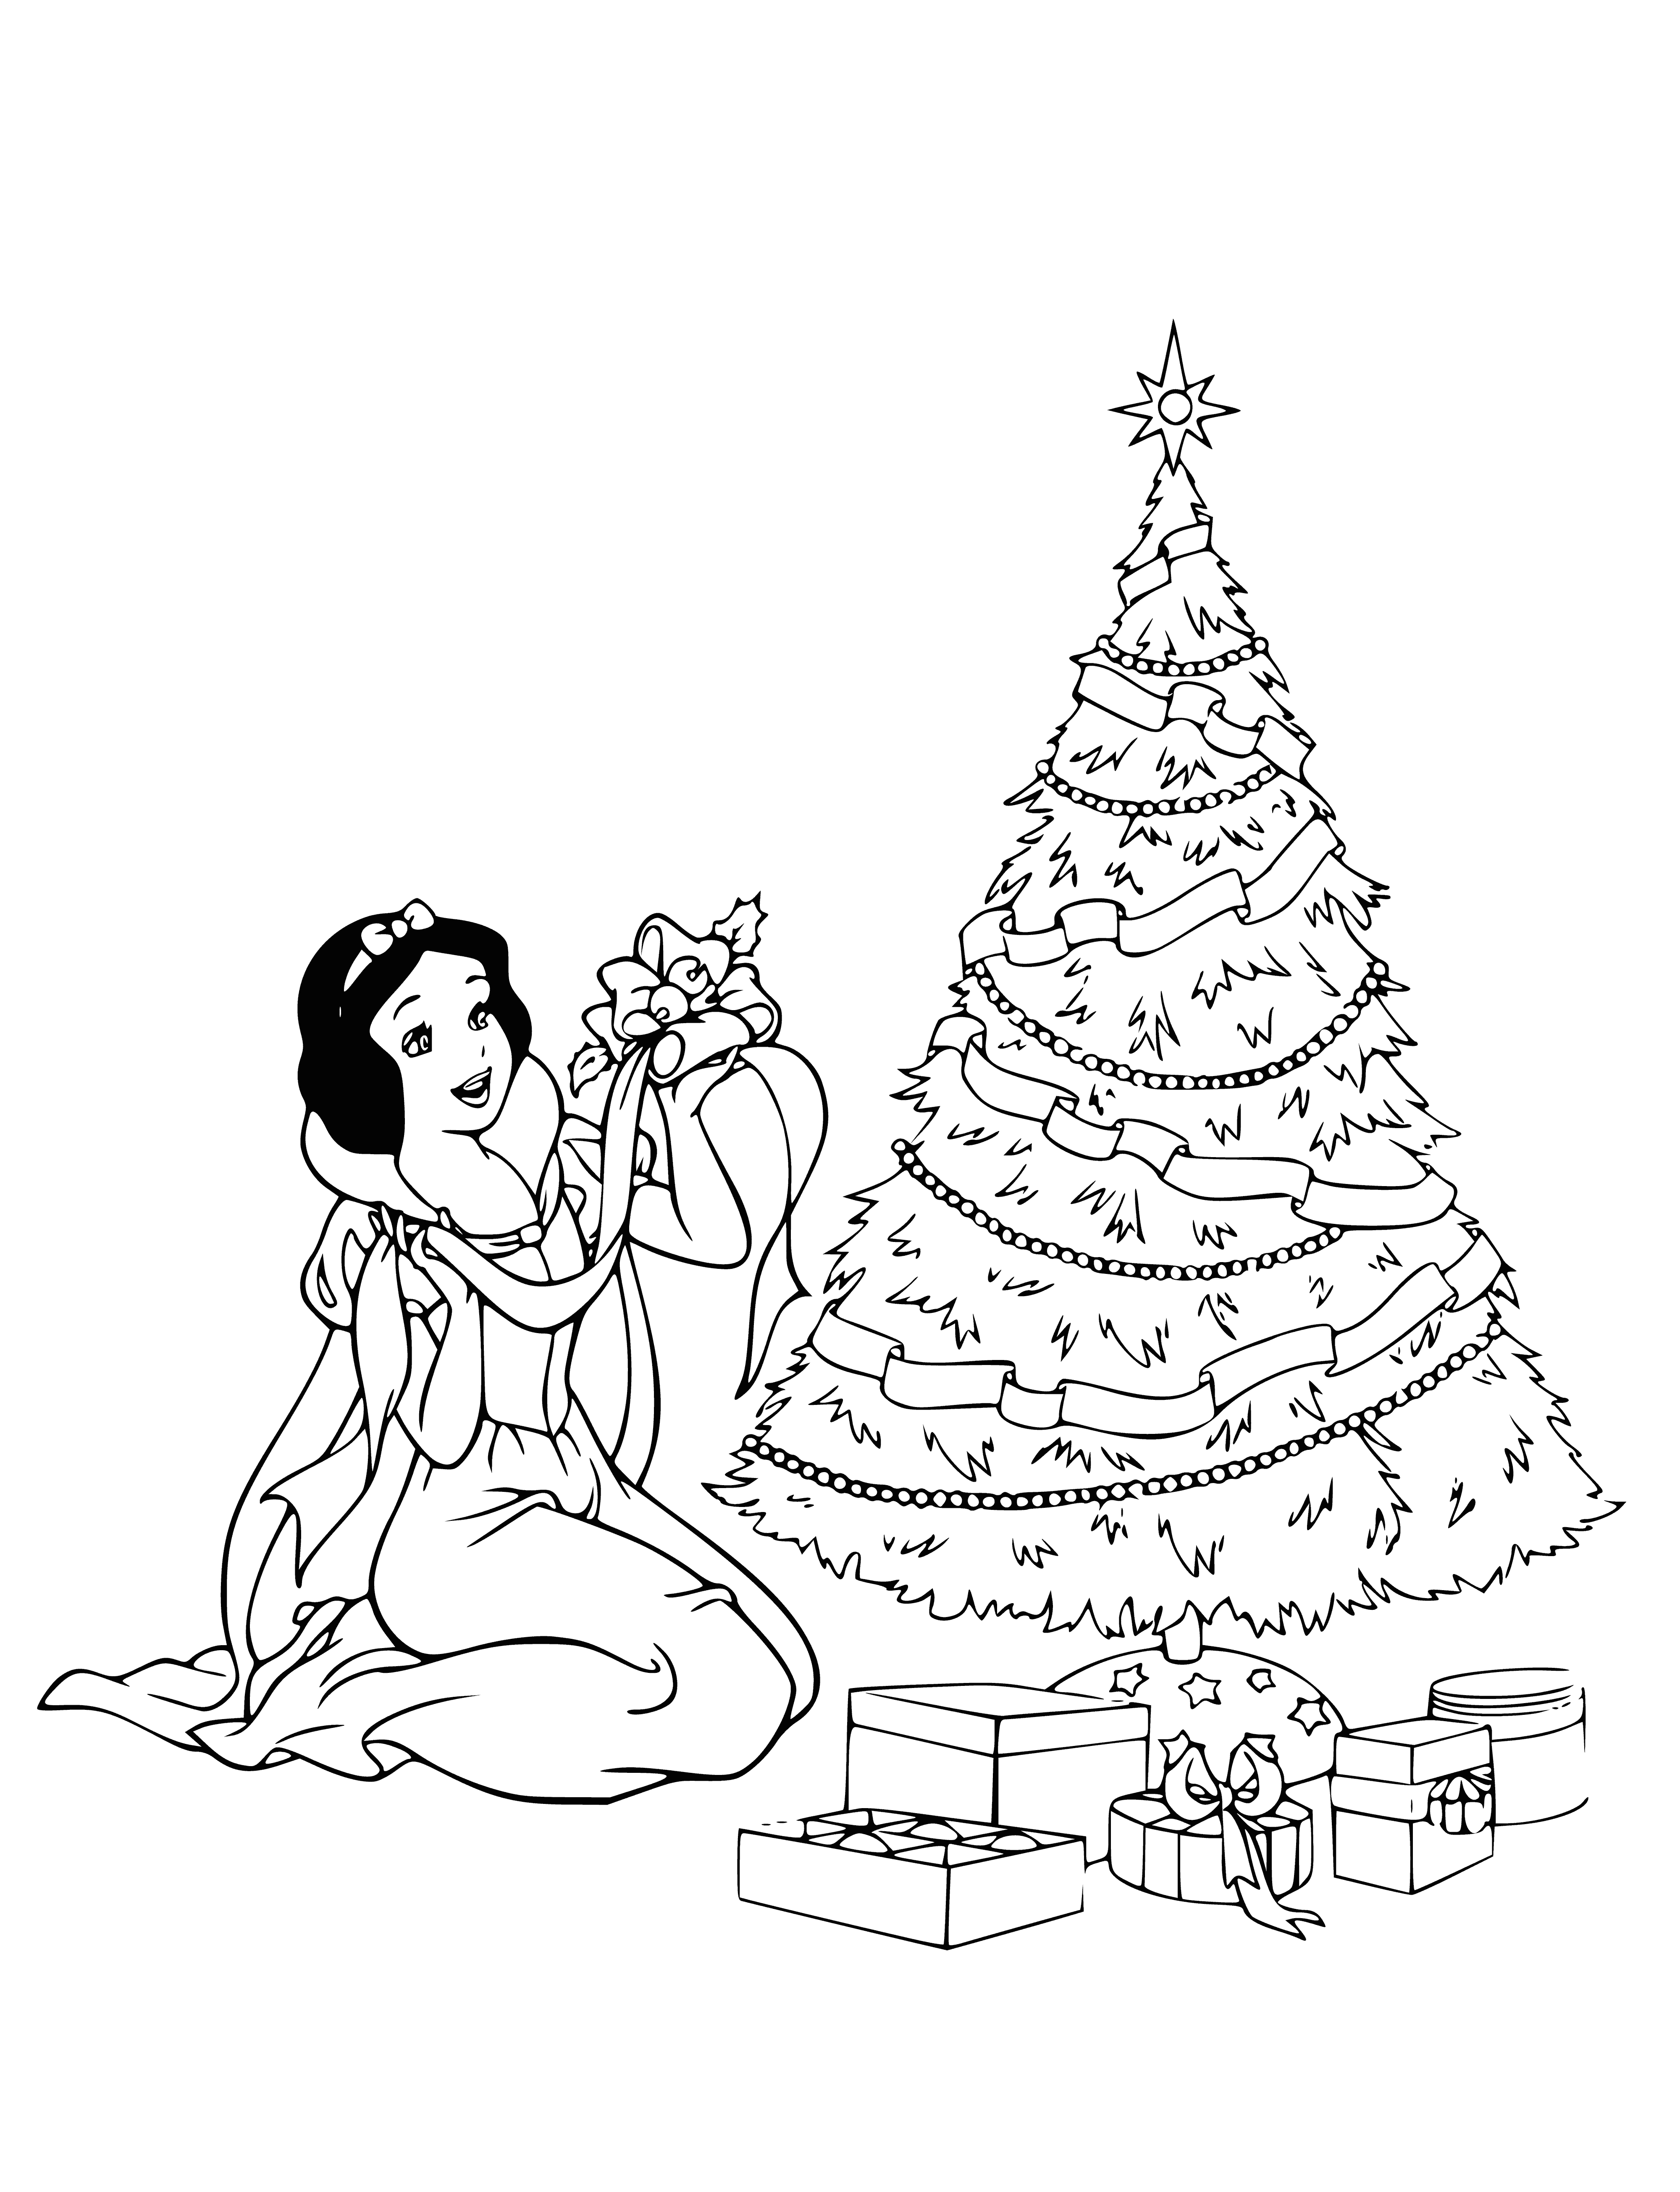 Snow White near the Christmas tree coloring page